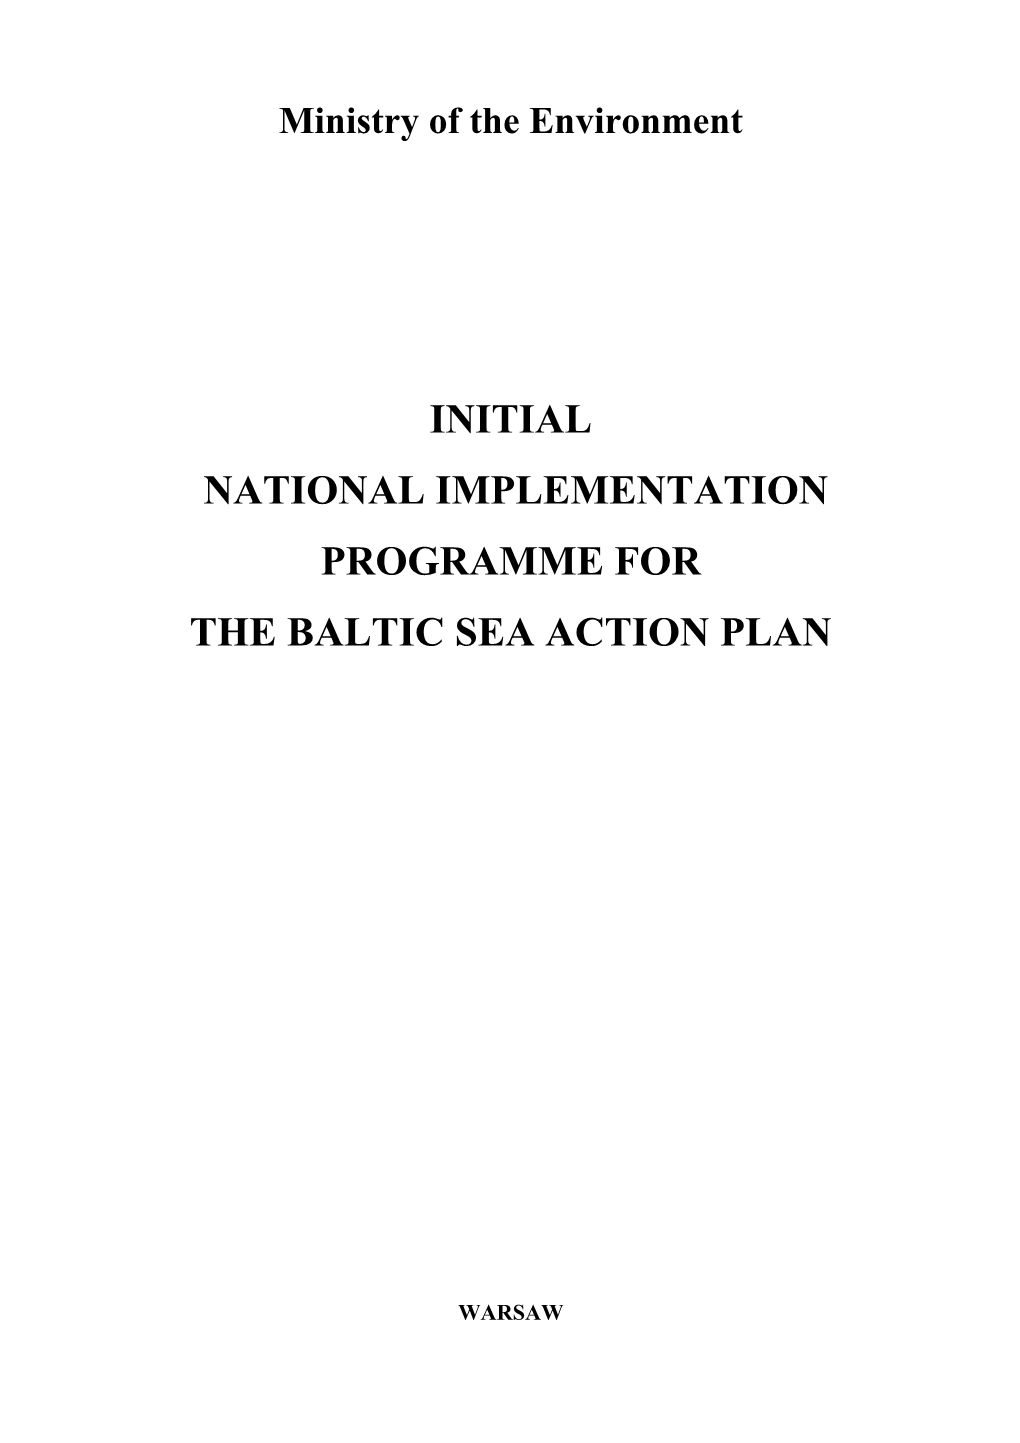 Initial National Implementation Programme For